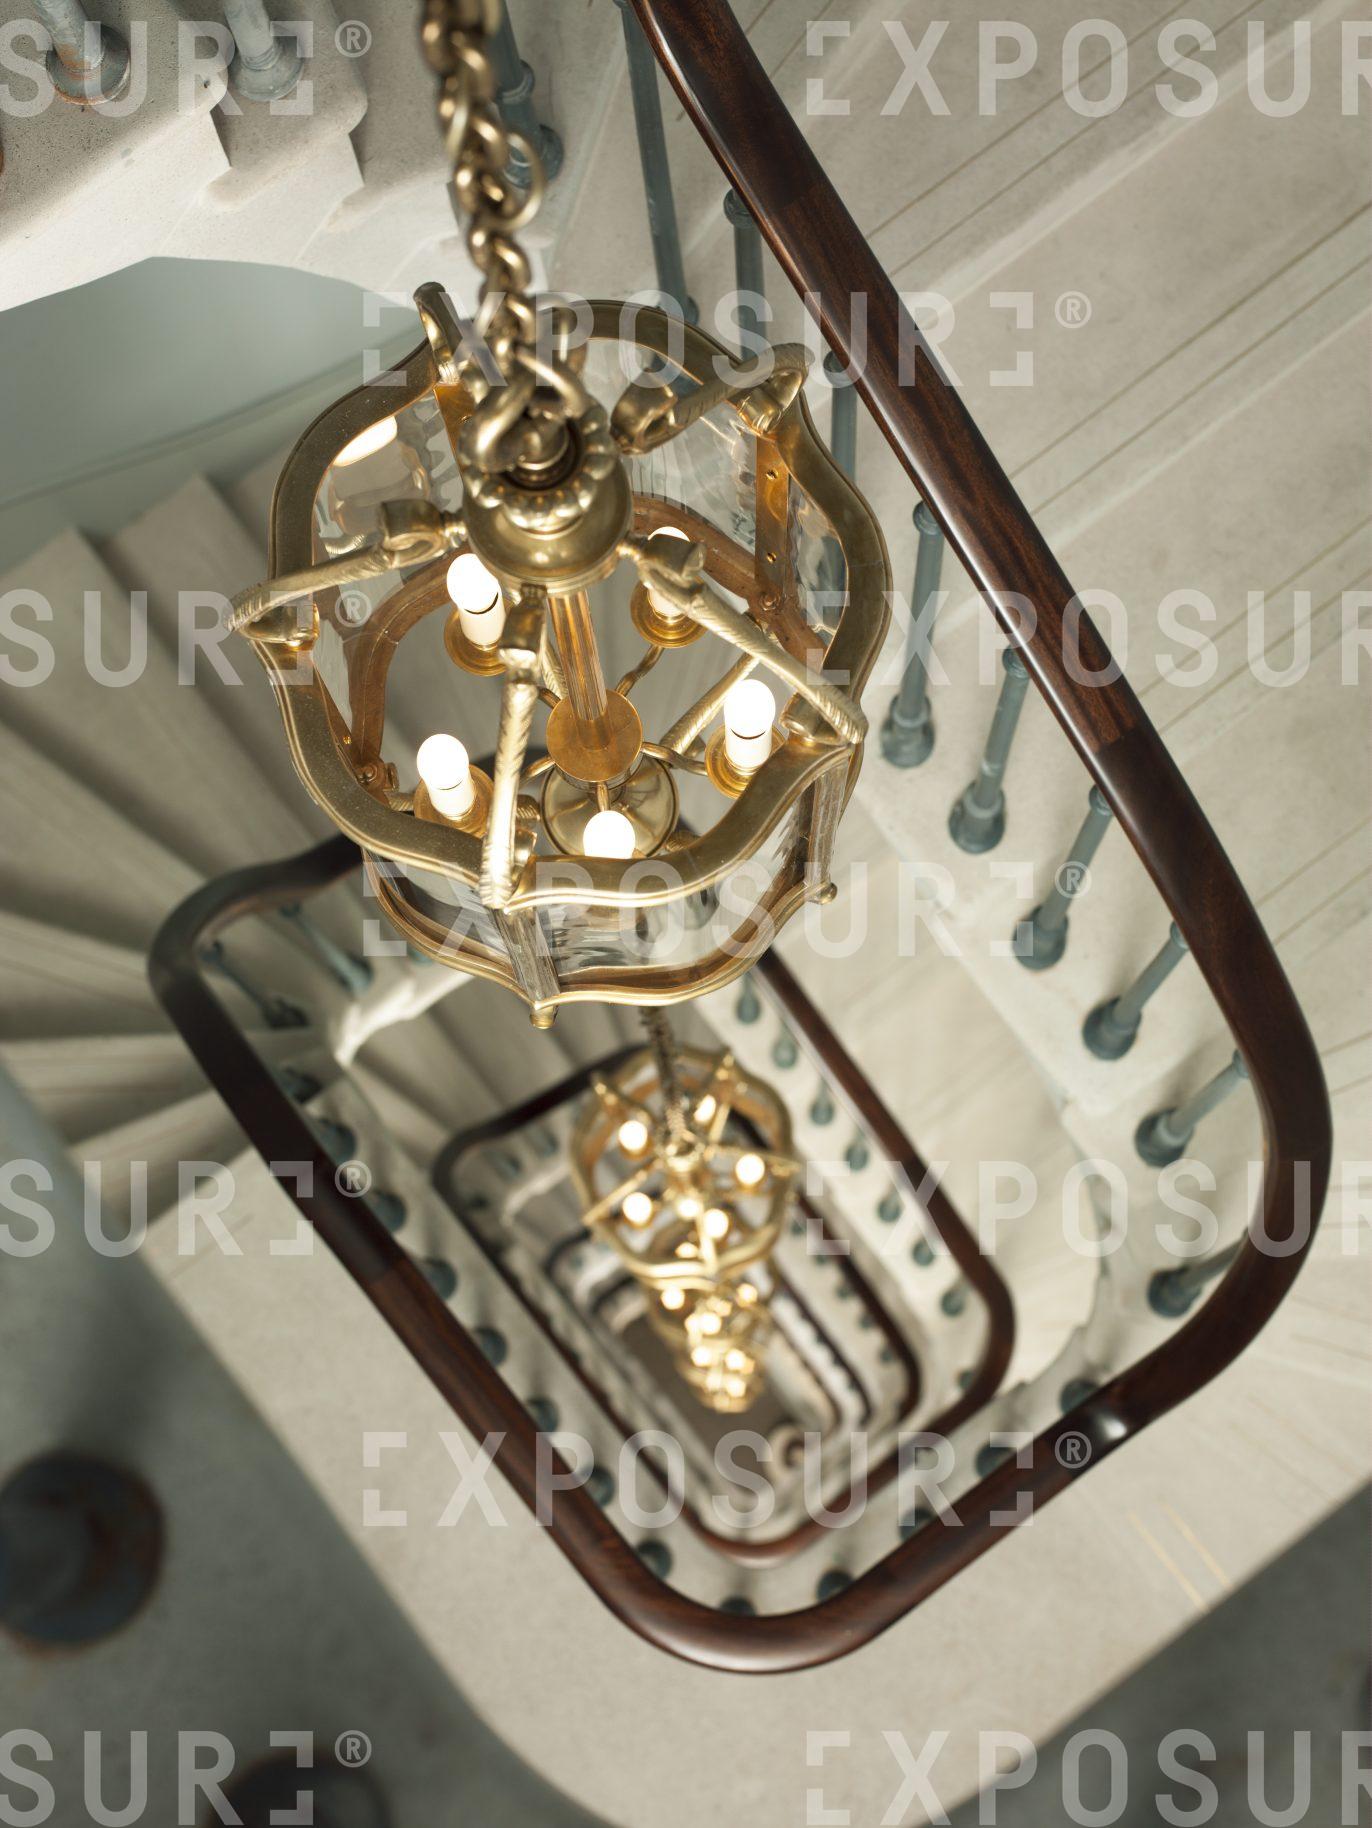 A Spiraling View Down The Stairs 03